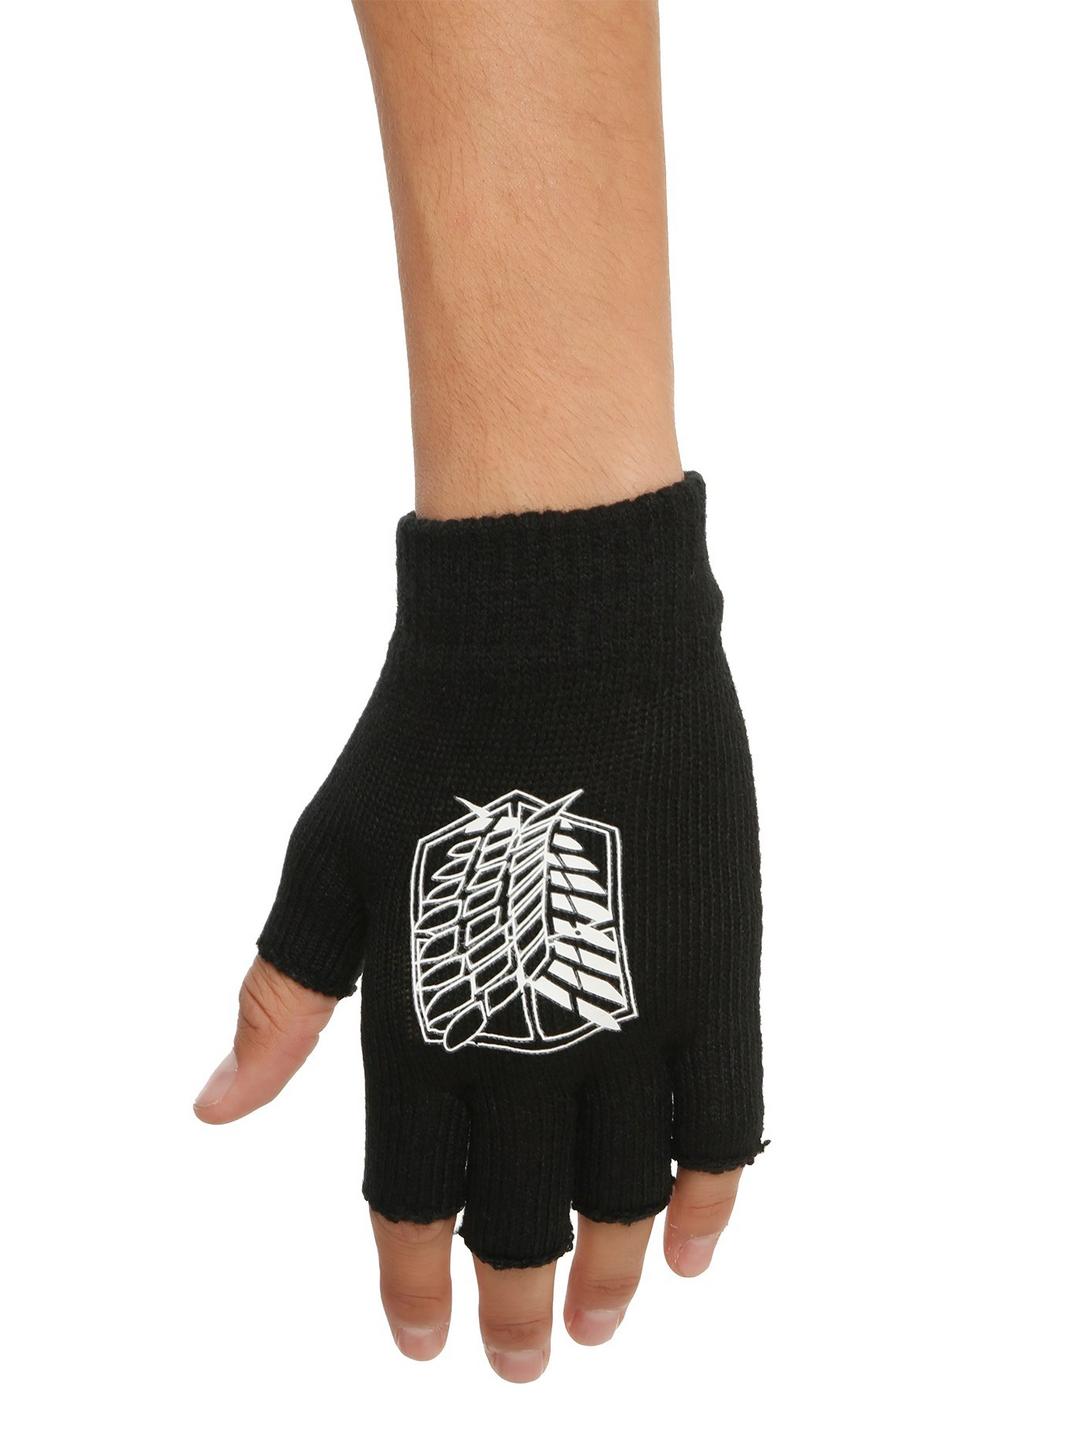 Attack On Titans Scouting Badge Fingerless Gloves, , hi-res